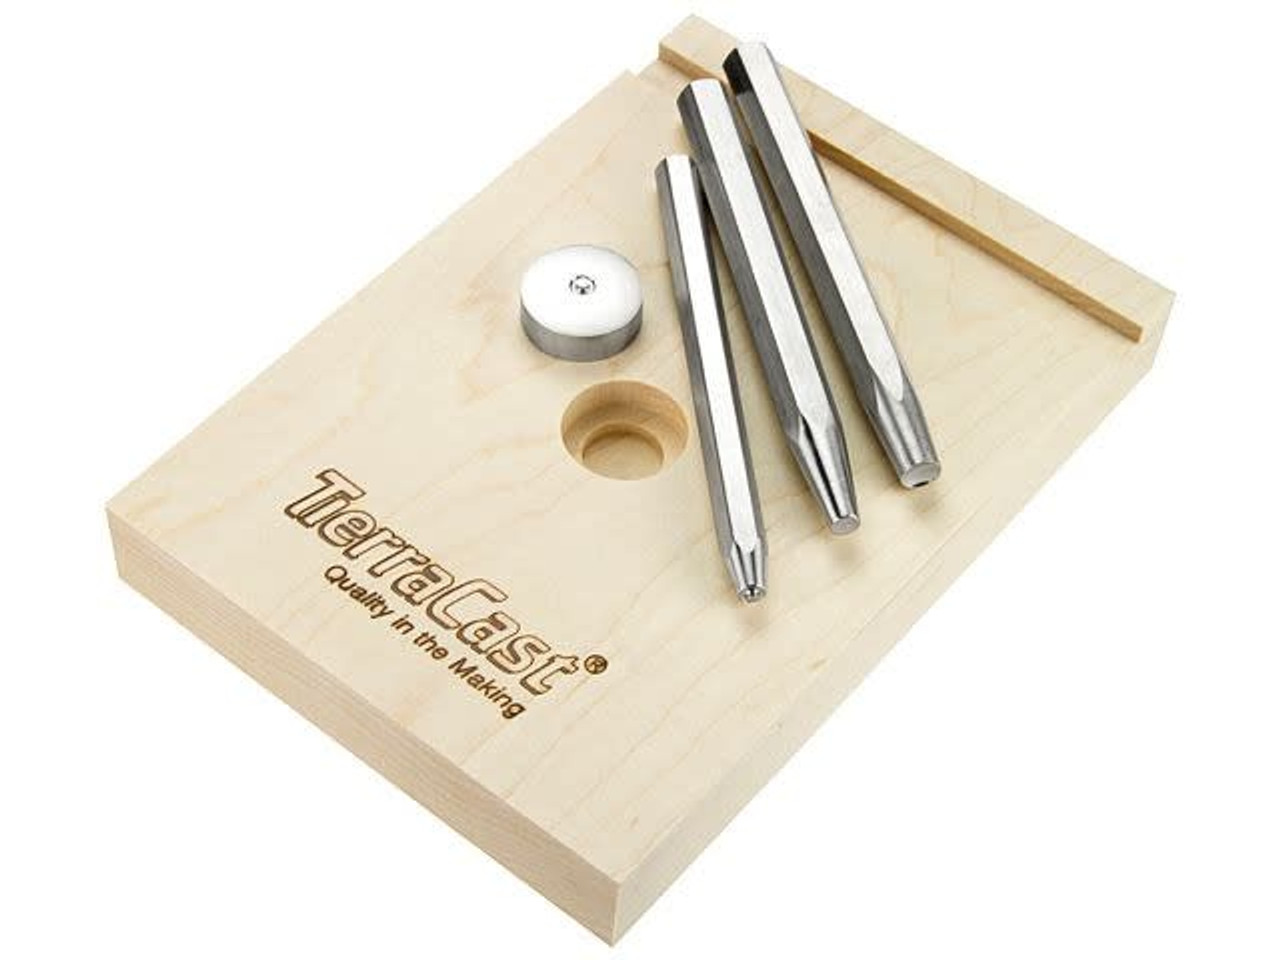 Beadsmith Solid Stainless Steel Mini Jewelry Anvil Wire Work Tool